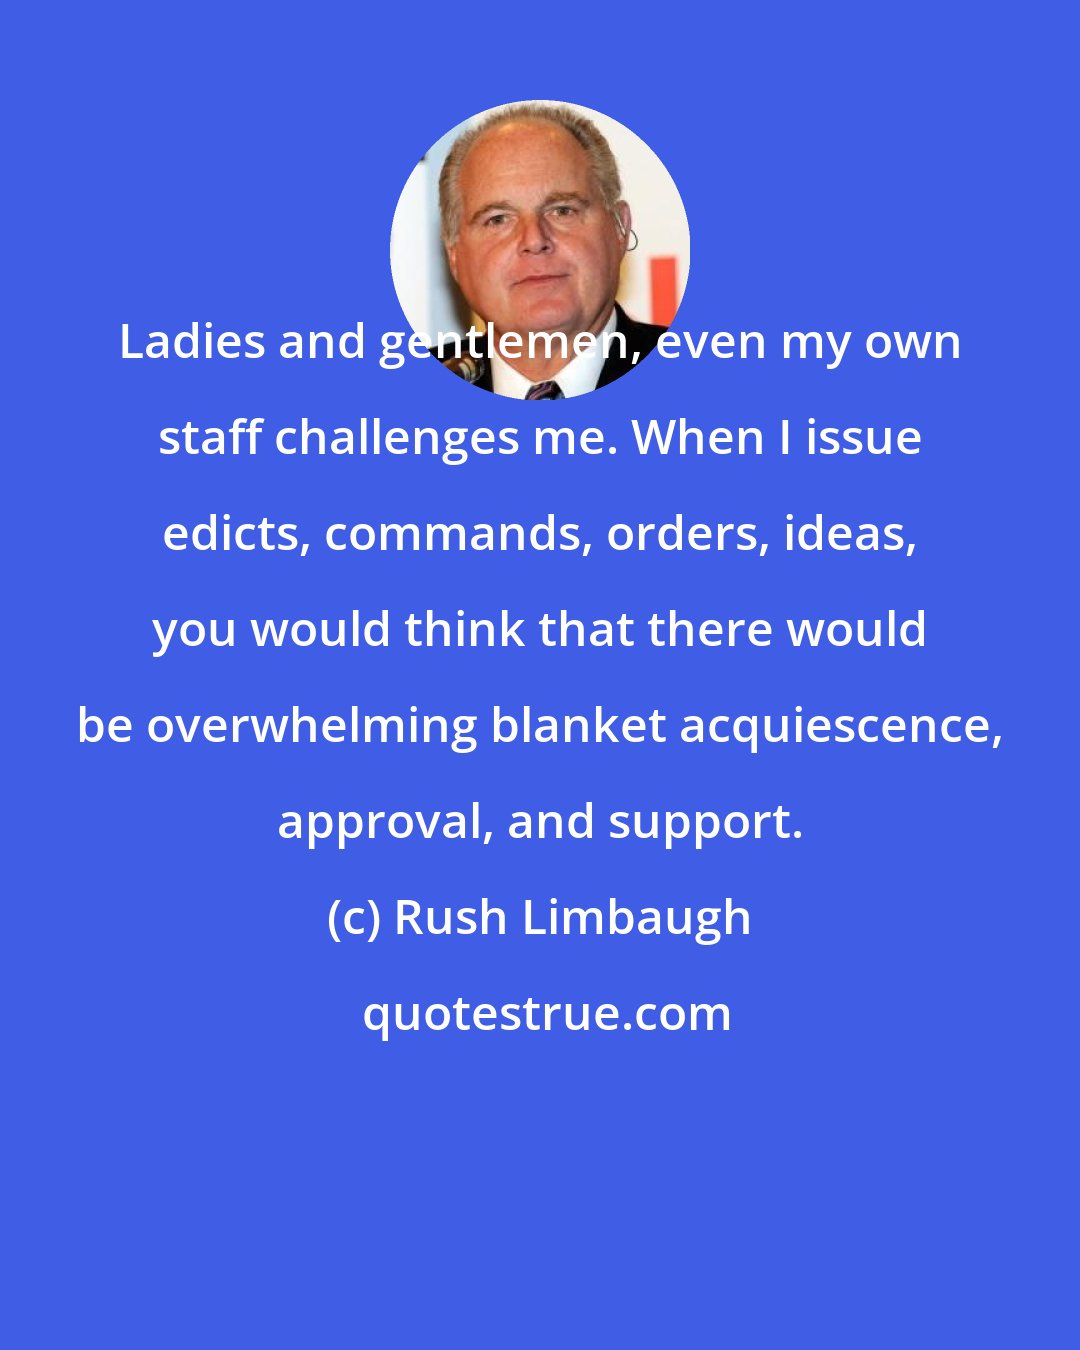 Rush Limbaugh: Ladies and gentlemen, even my own staff challenges me. When I issue edicts, commands, orders, ideas, you would think that there would be overwhelming blanket acquiescence, approval, and support.